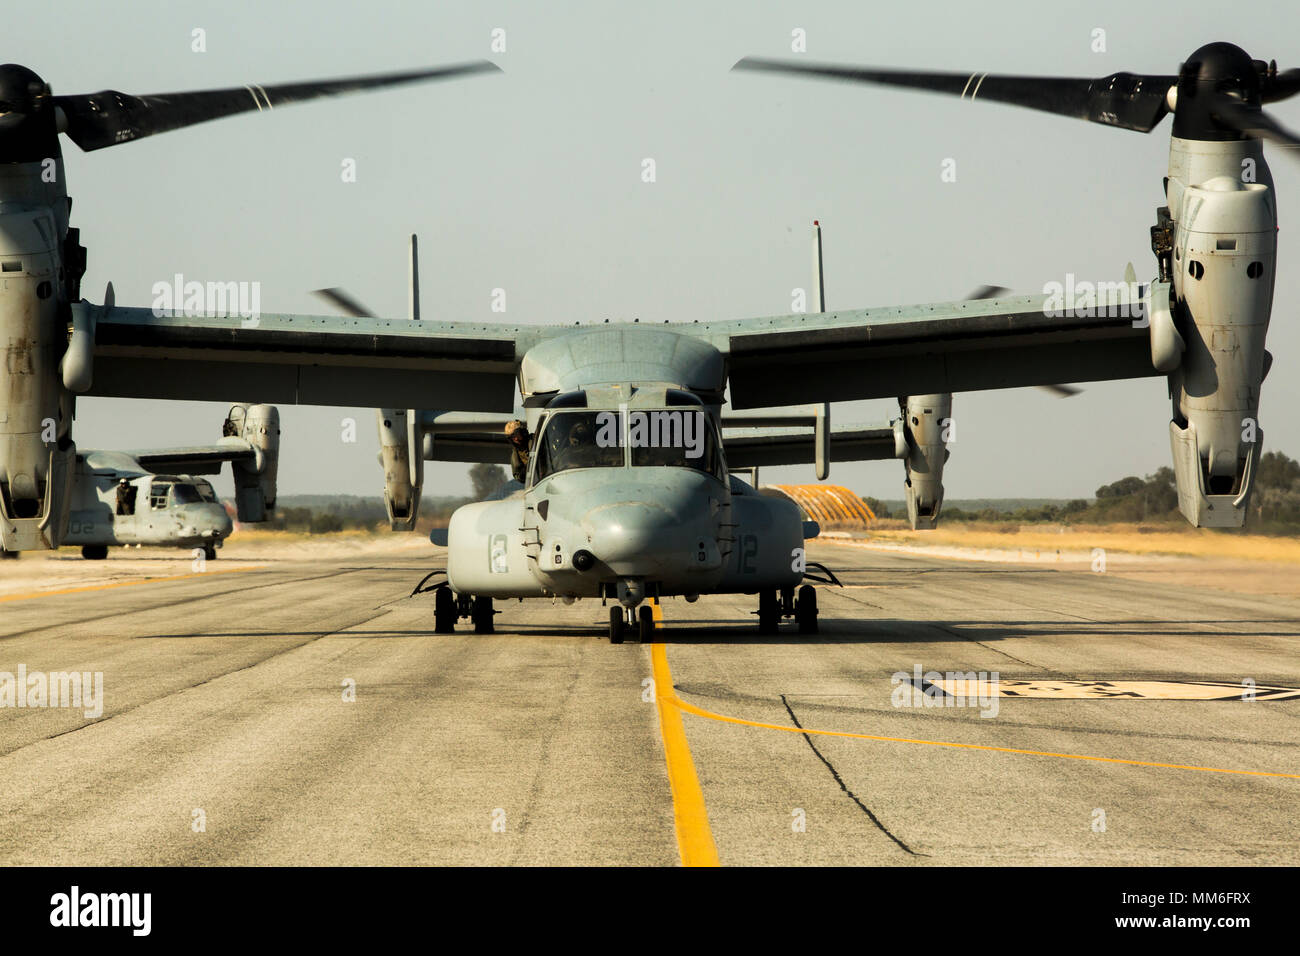 MV-22B Osprey aircraft assigned to the 24th Marine Expeditionary Unit taxi across the flightline at Morón Air Base Spain, Sept. 7, 2017. The 24th MEU sent aircraft and personnel to conduct maintenance while on station at Morón. (U.S. Marine Corps Photo by Cpl. Jodson B. Graves) Stock Photo